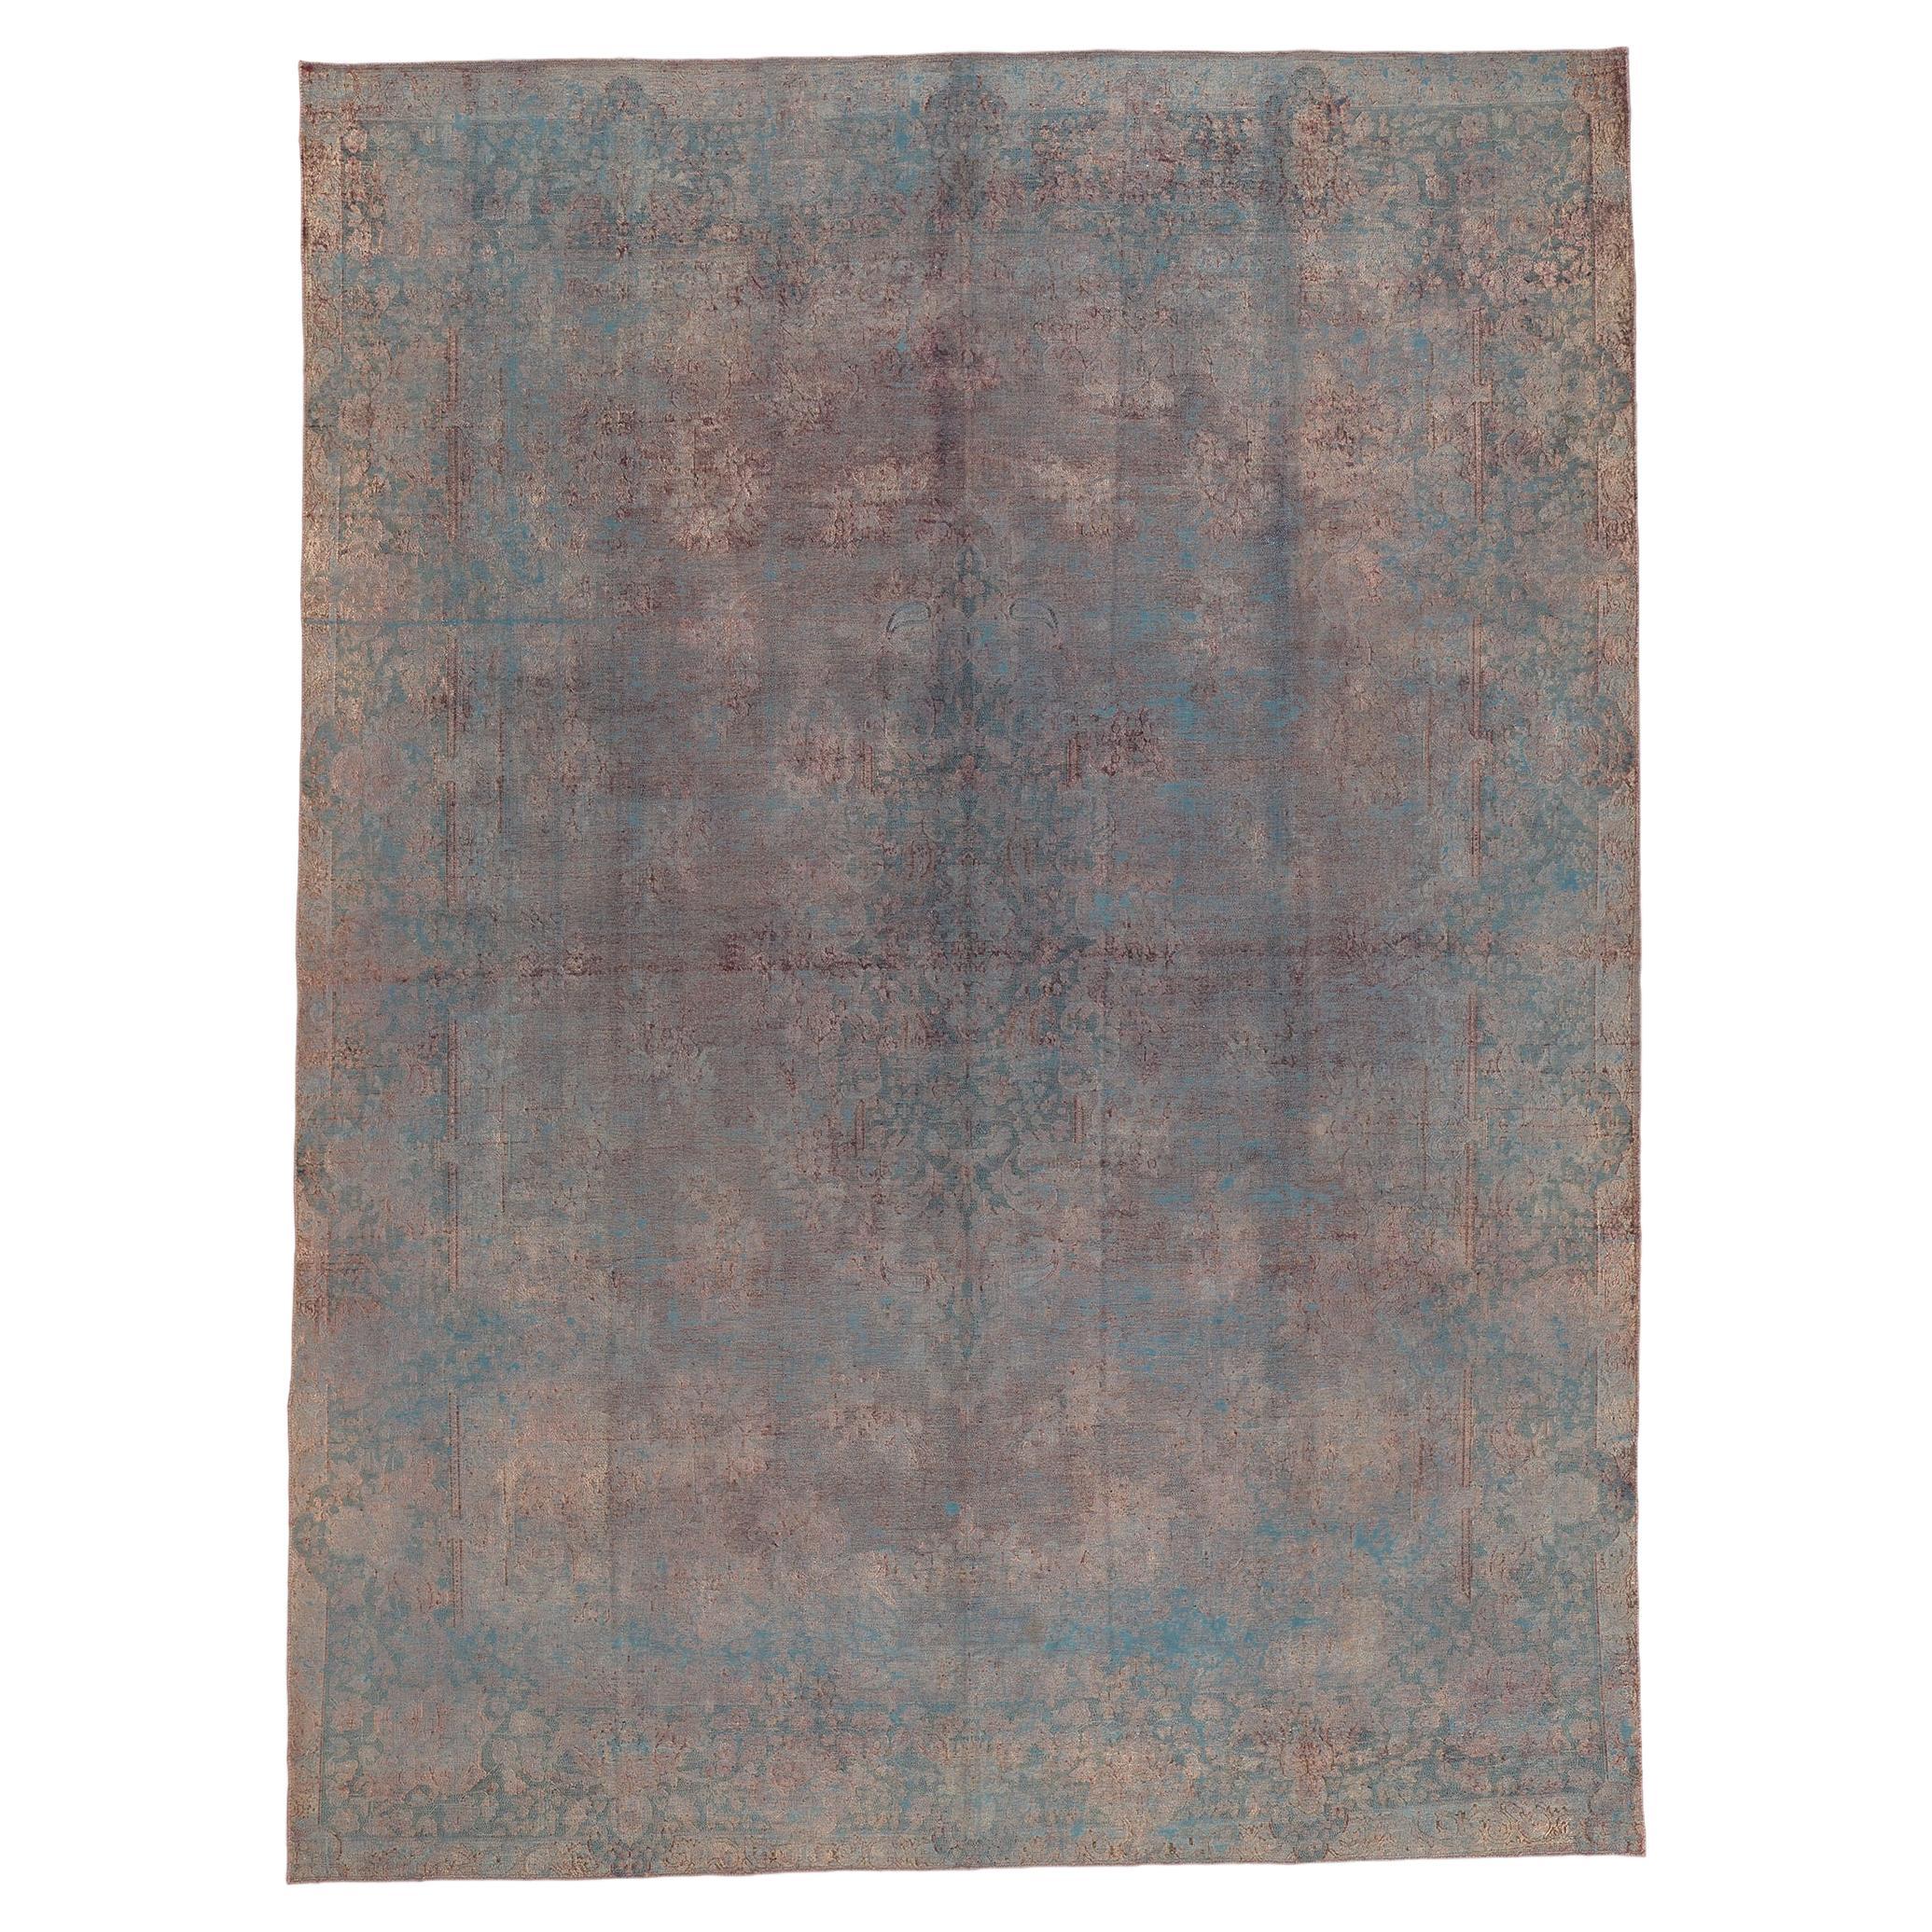 Vintage Turkish Overdyed Rug, Industrial Boho Meets Chic City Loft For Sale